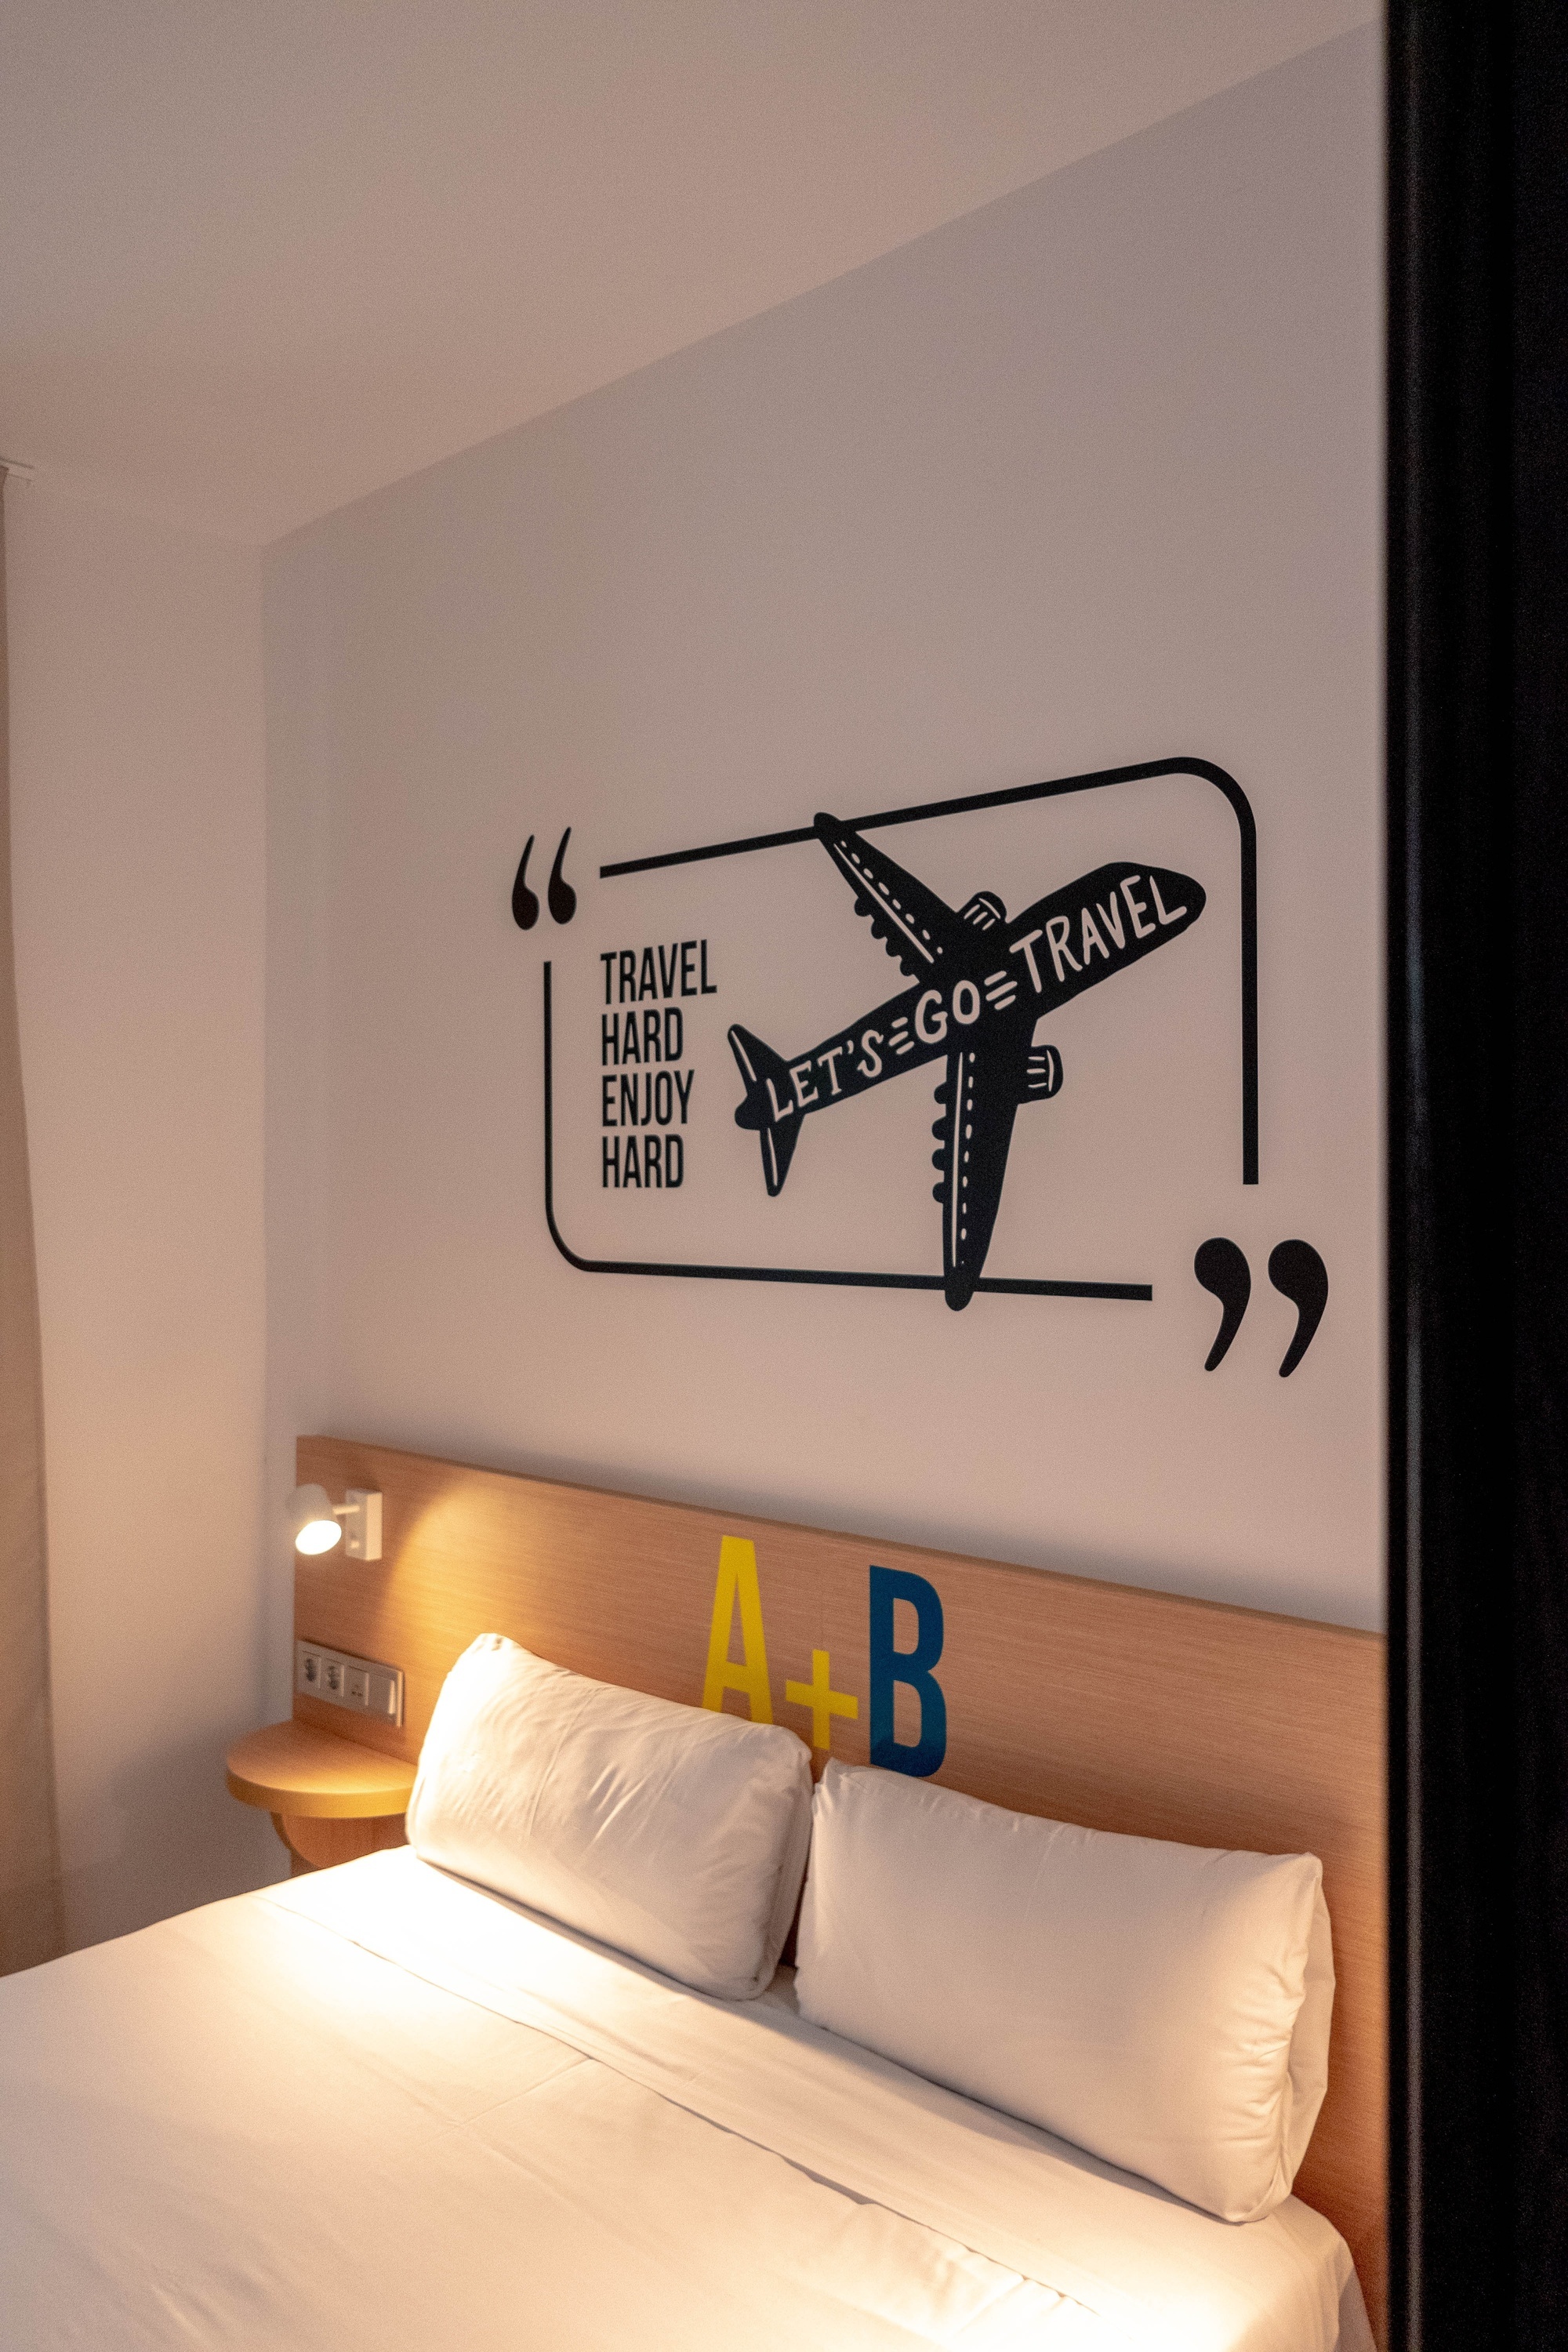 a bedroom with a quote on the wall that says travel hard be happy hard